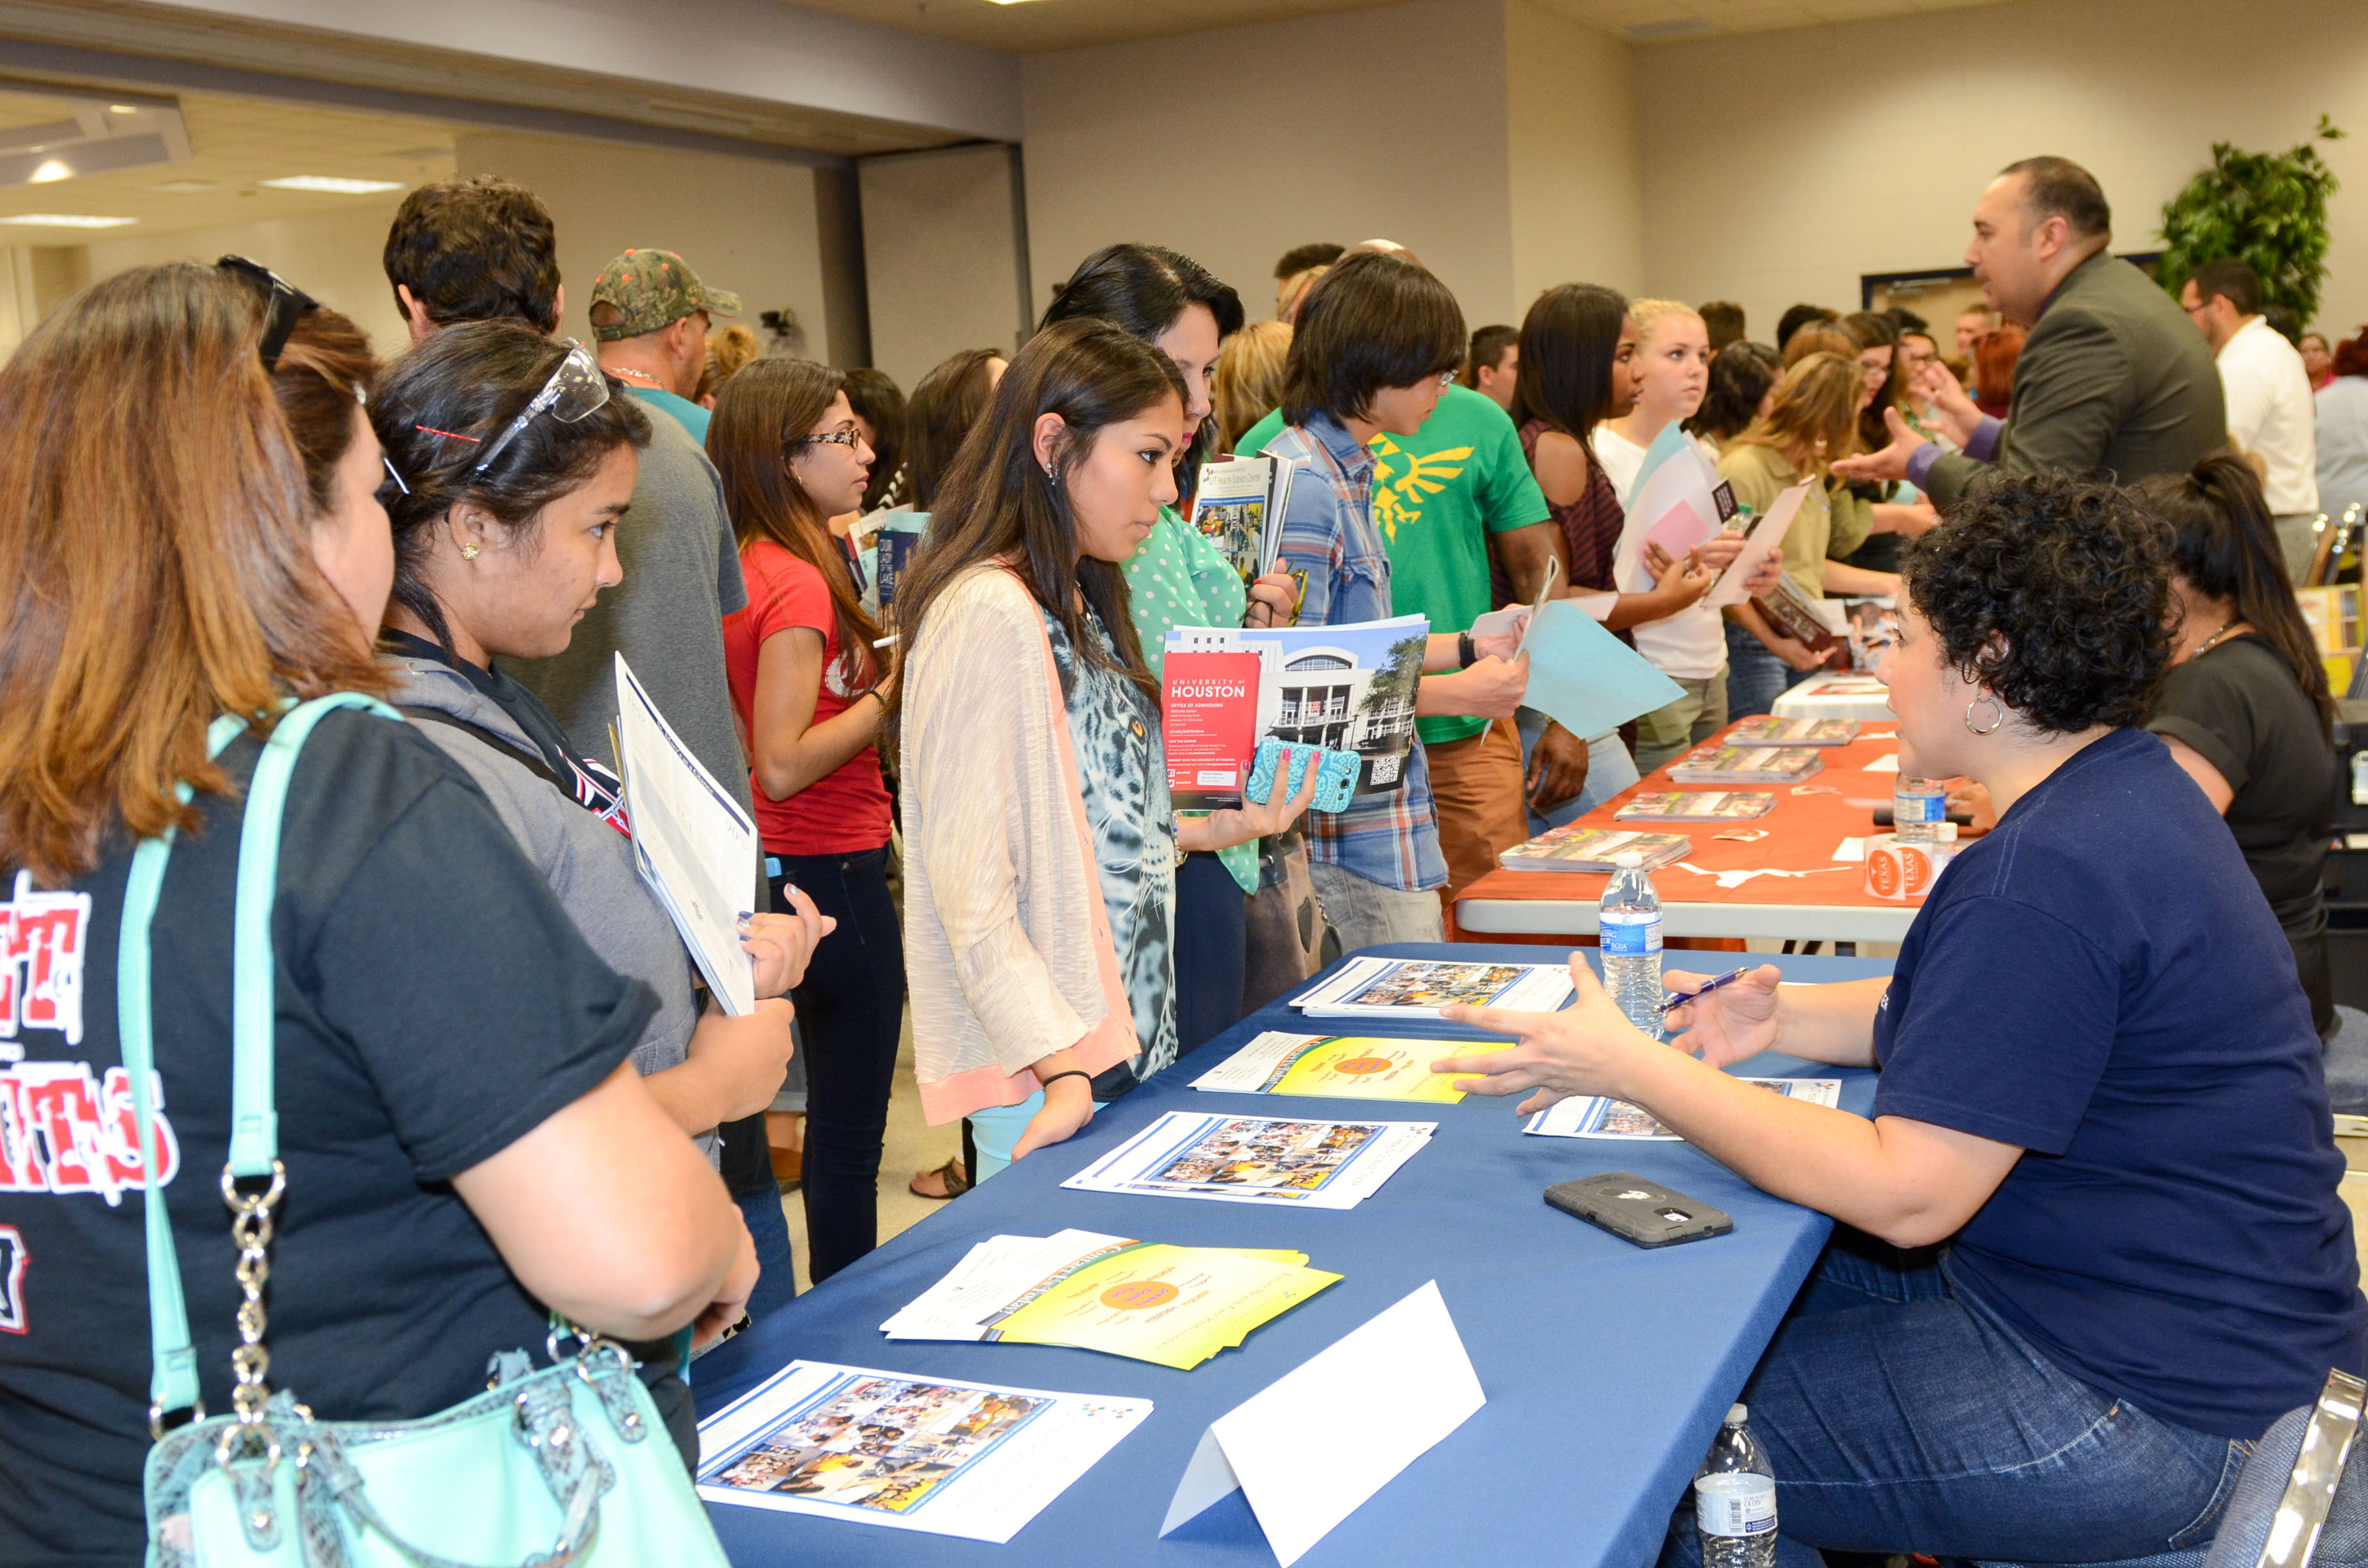 College Night 2014: Growing event brings college awareness to students